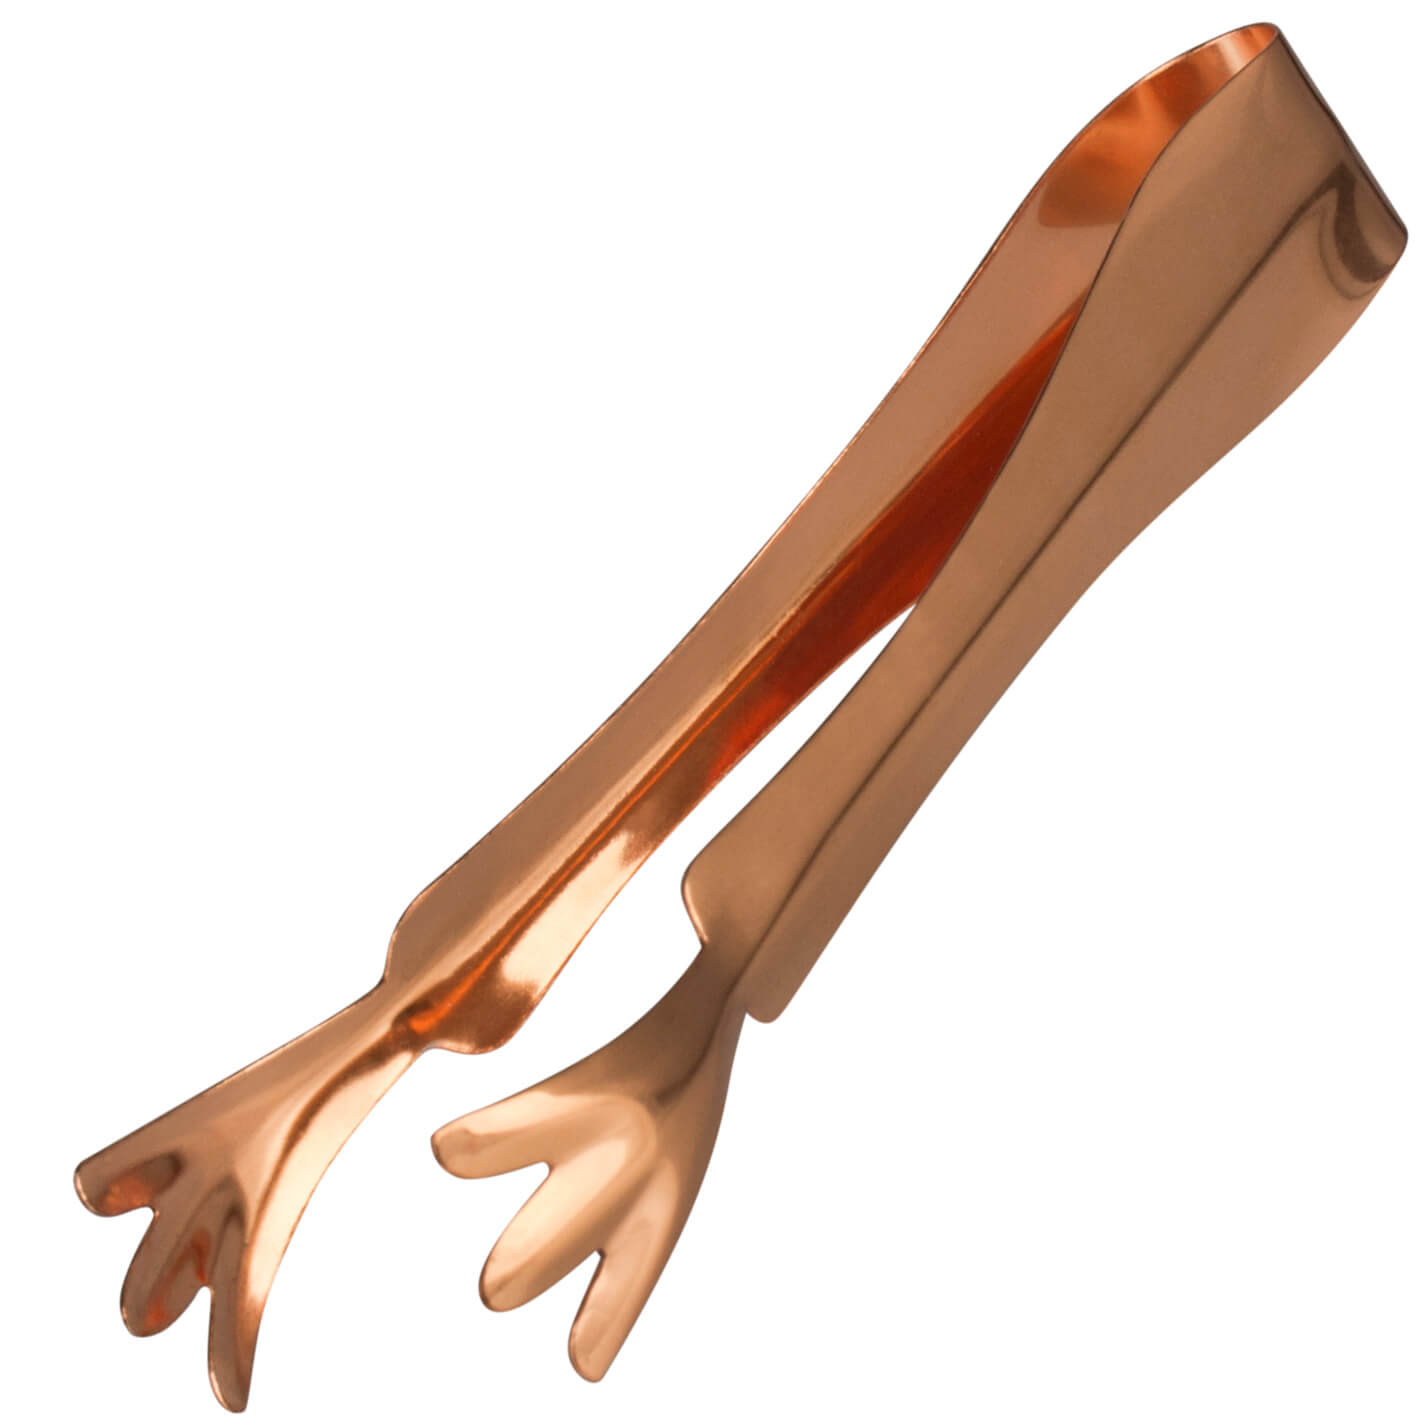 Tongs Chicken Feet, Prime Bar - copper-colored (17cm)